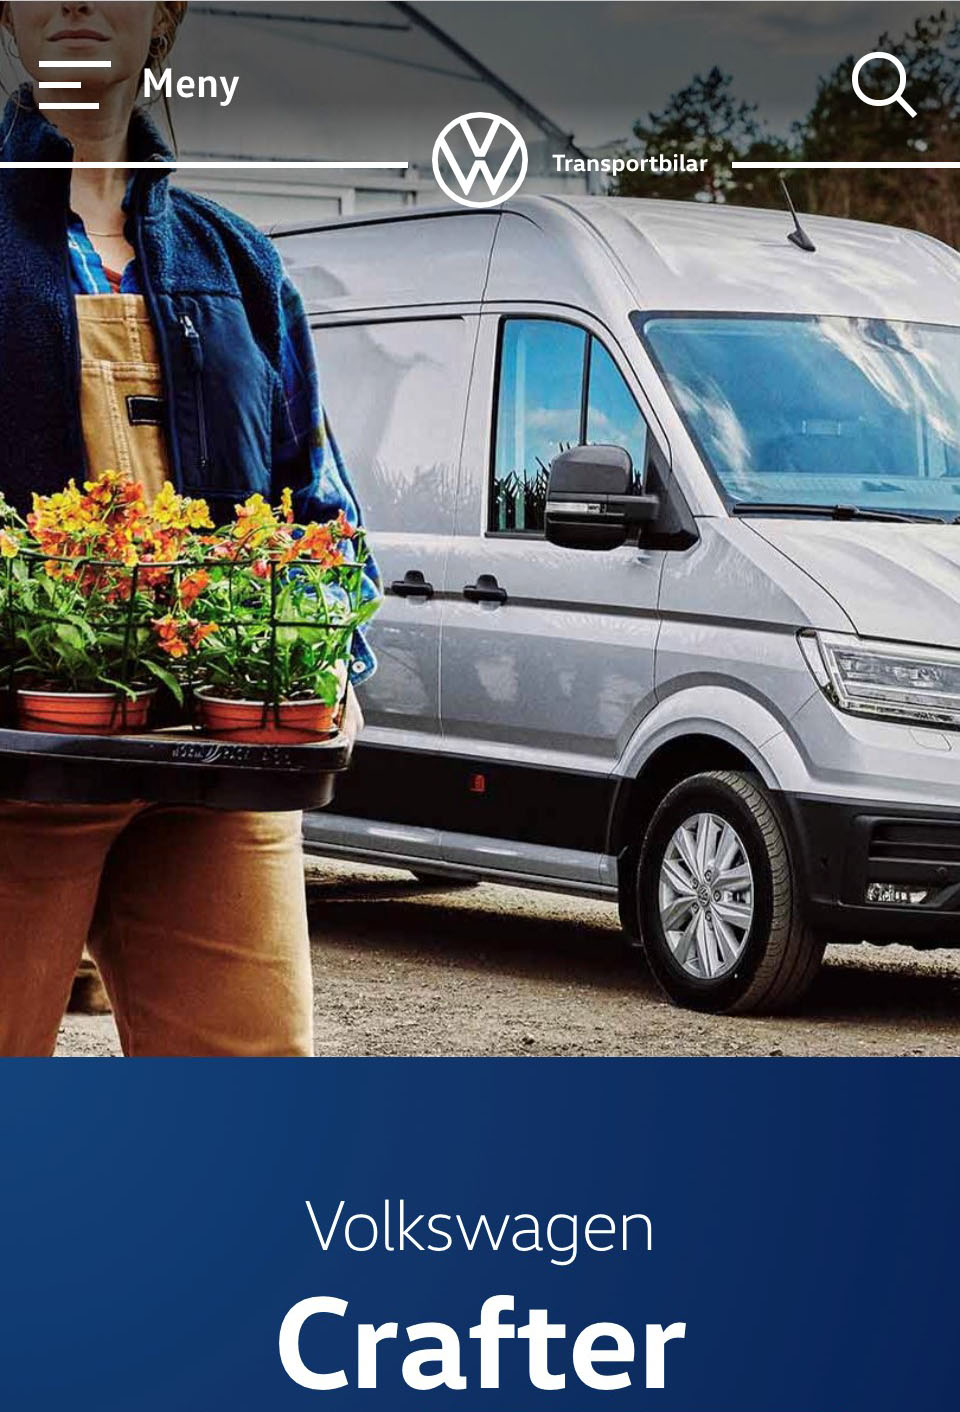 VW Crafter mobile page